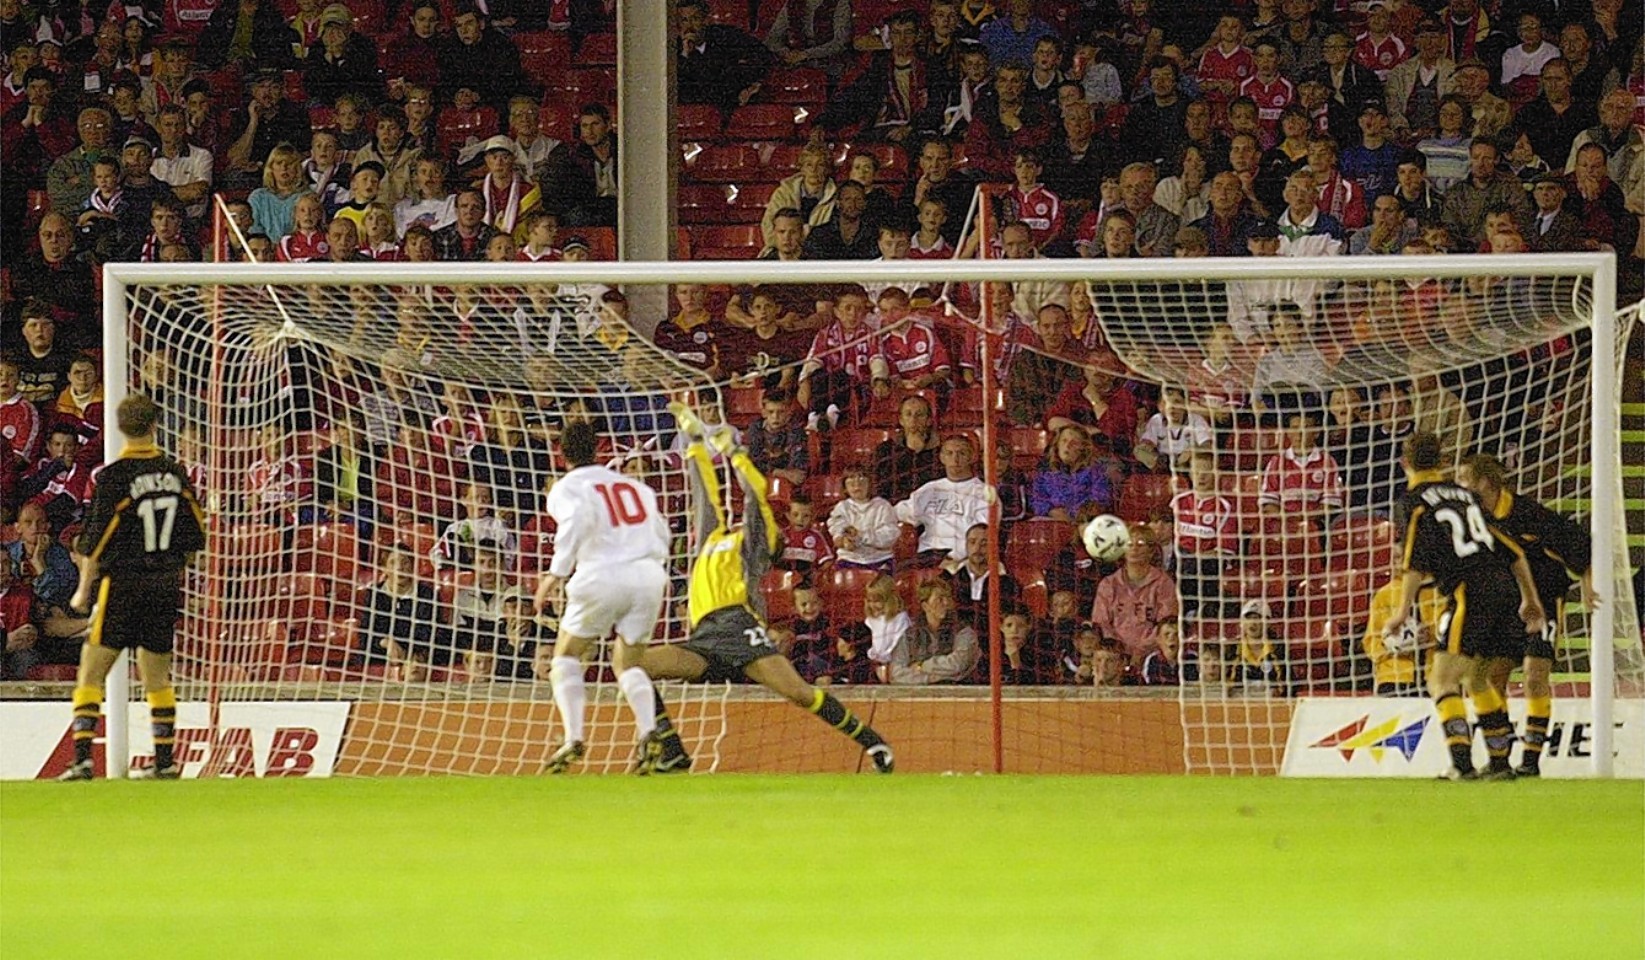 Esson concedes the opening goal in his previous European experience - playing for the Dons against Bohemians 